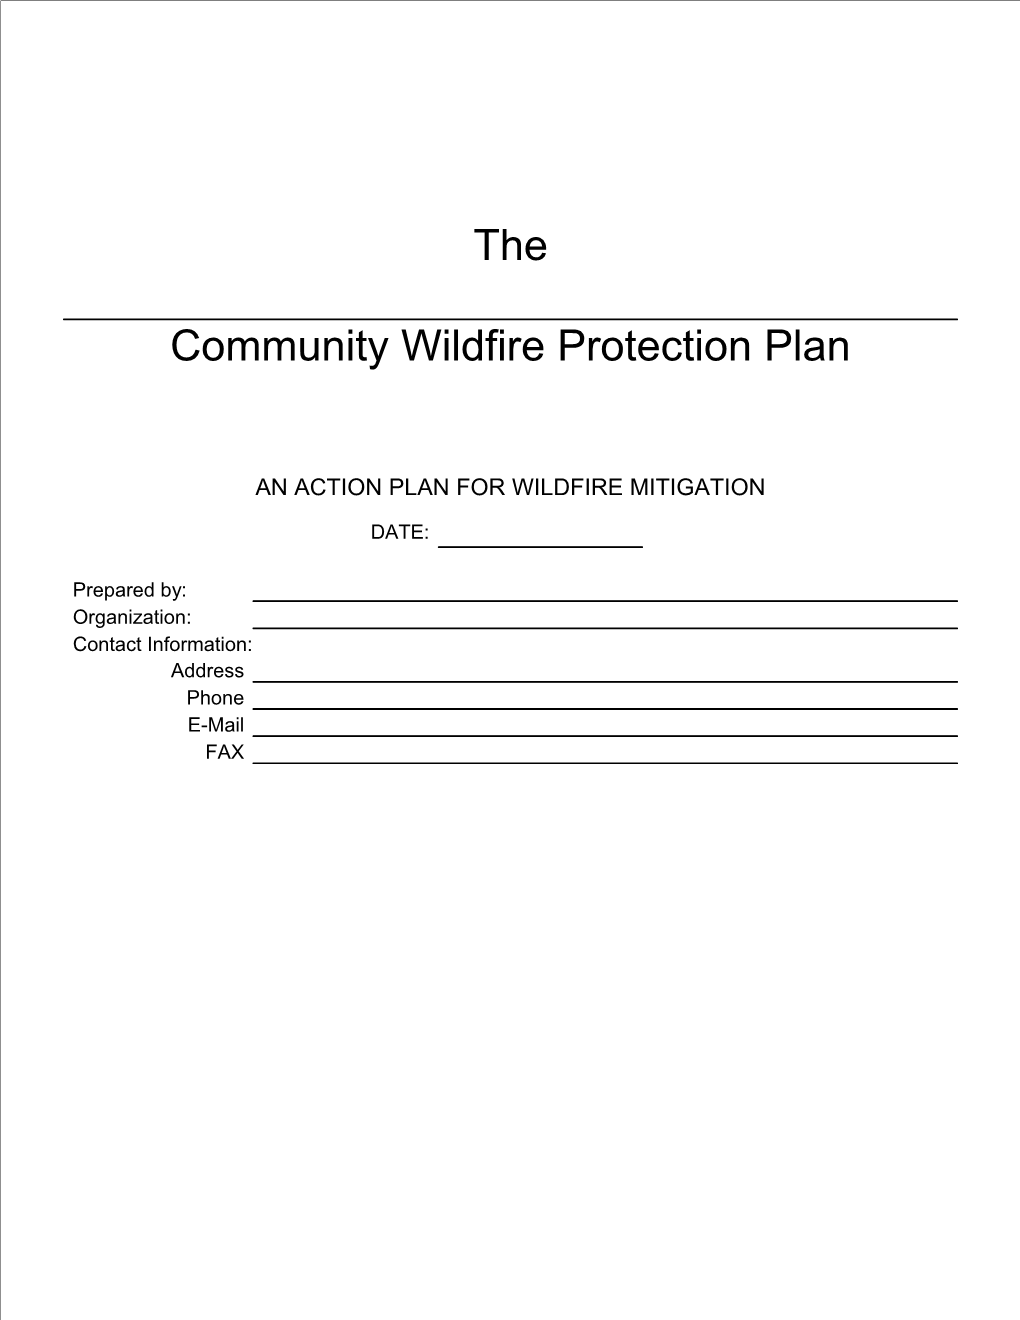 Wildfire Protection Plan: an Action Plan for Wildfire Mitigation 10